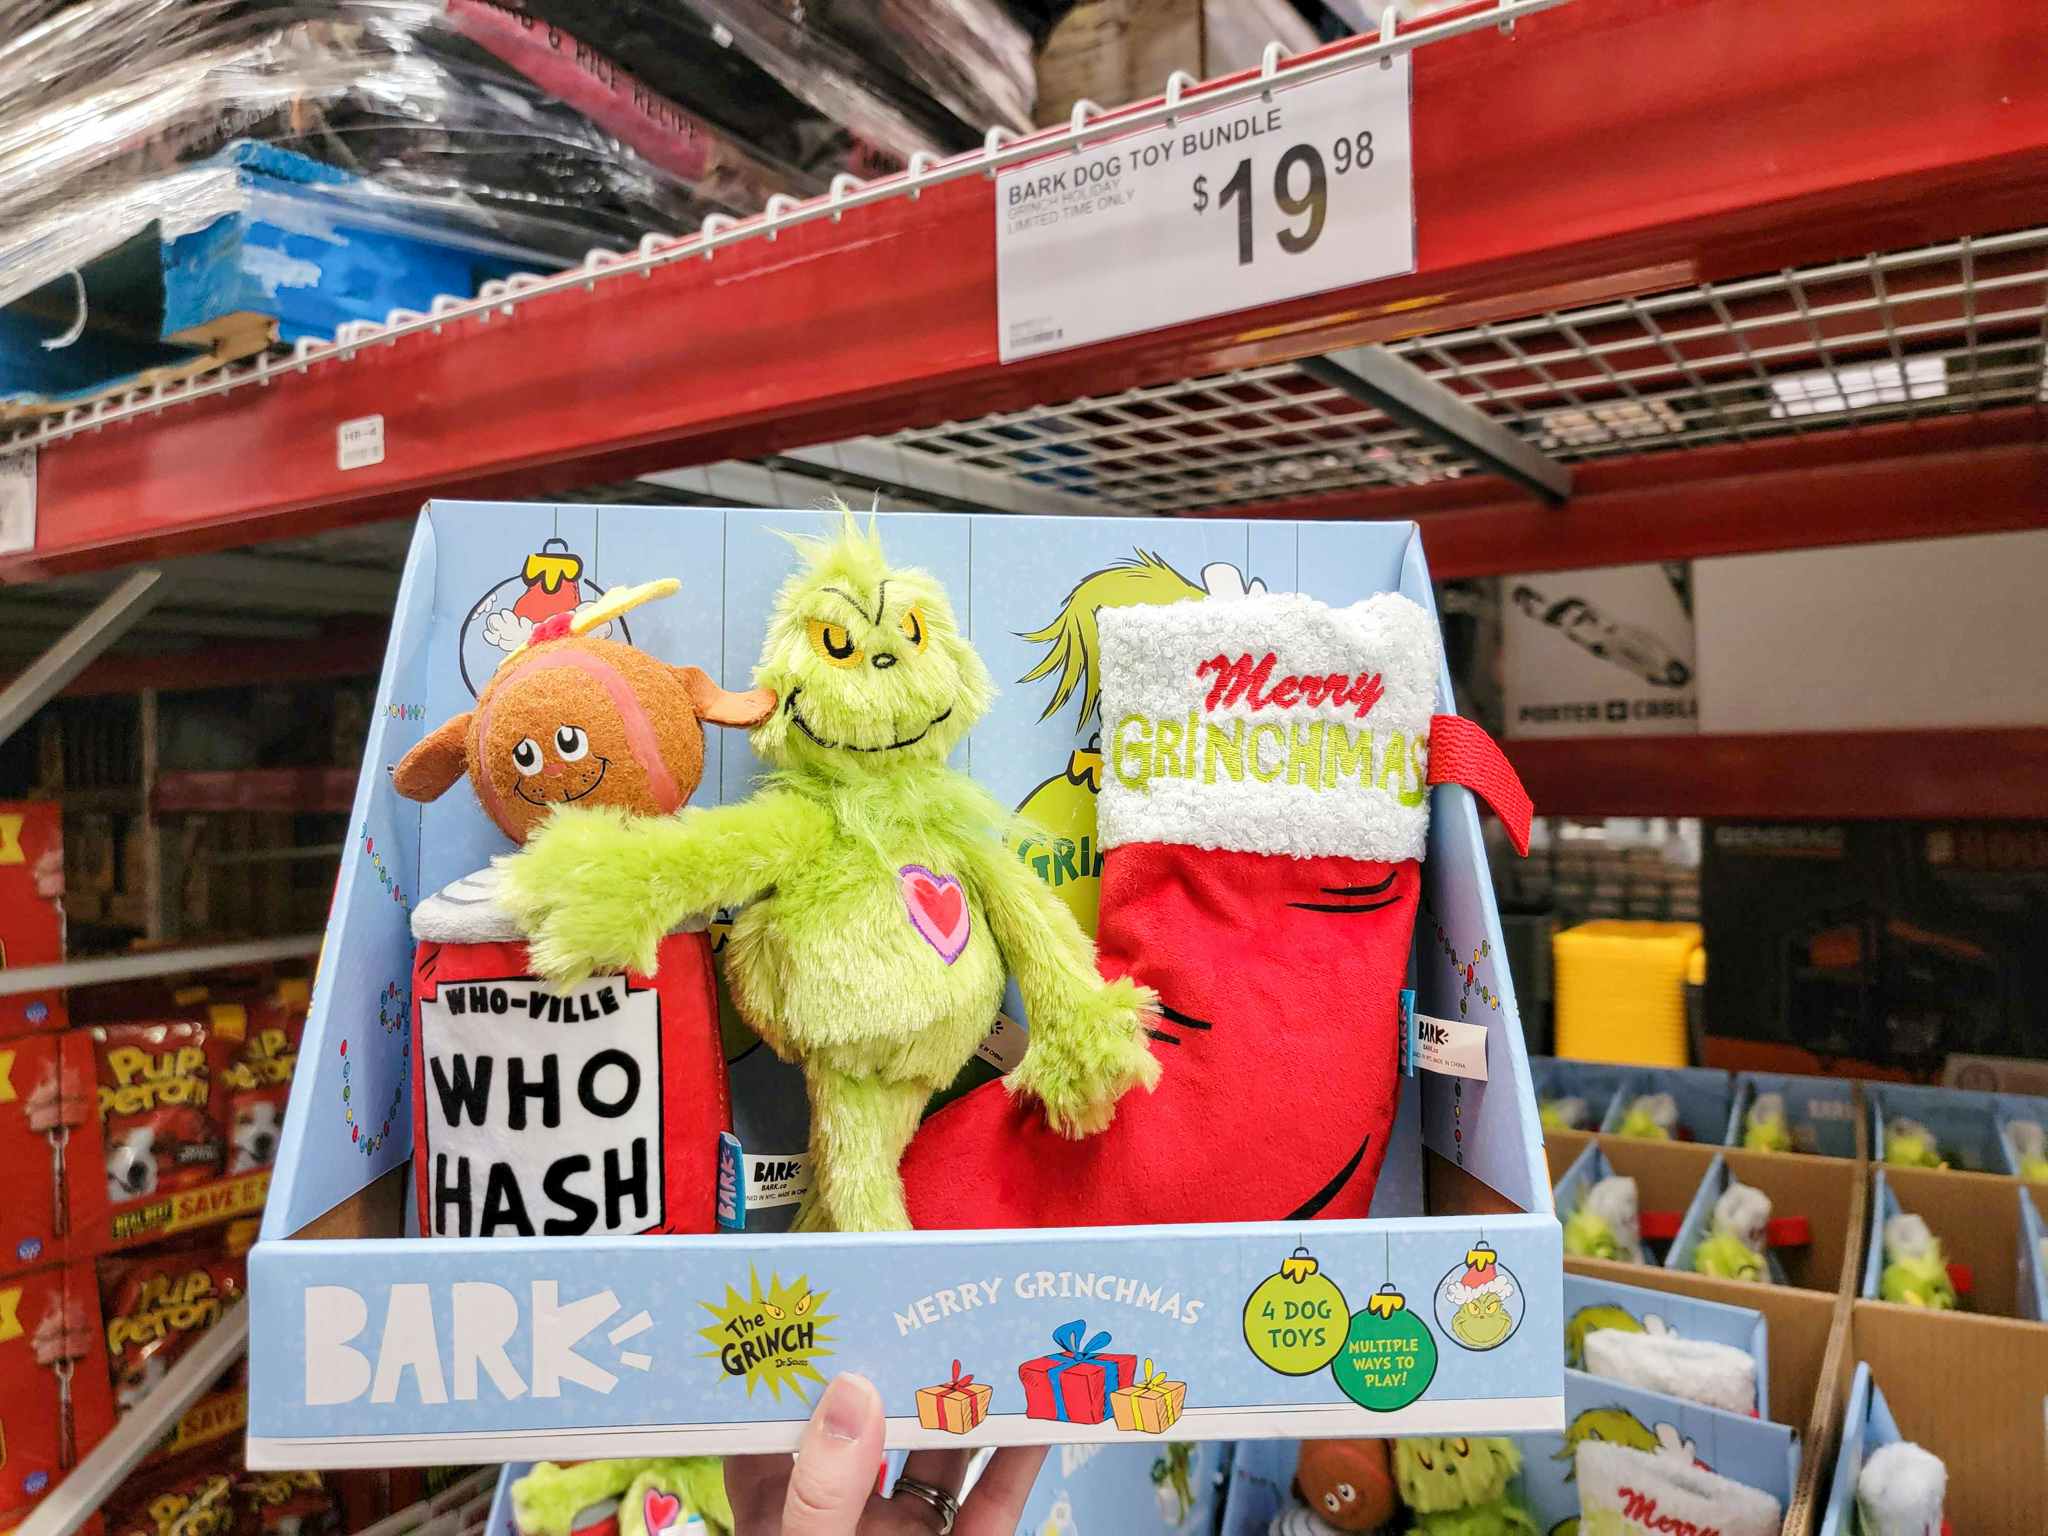 hand holding a 4-pack of grinch dog toys by bark